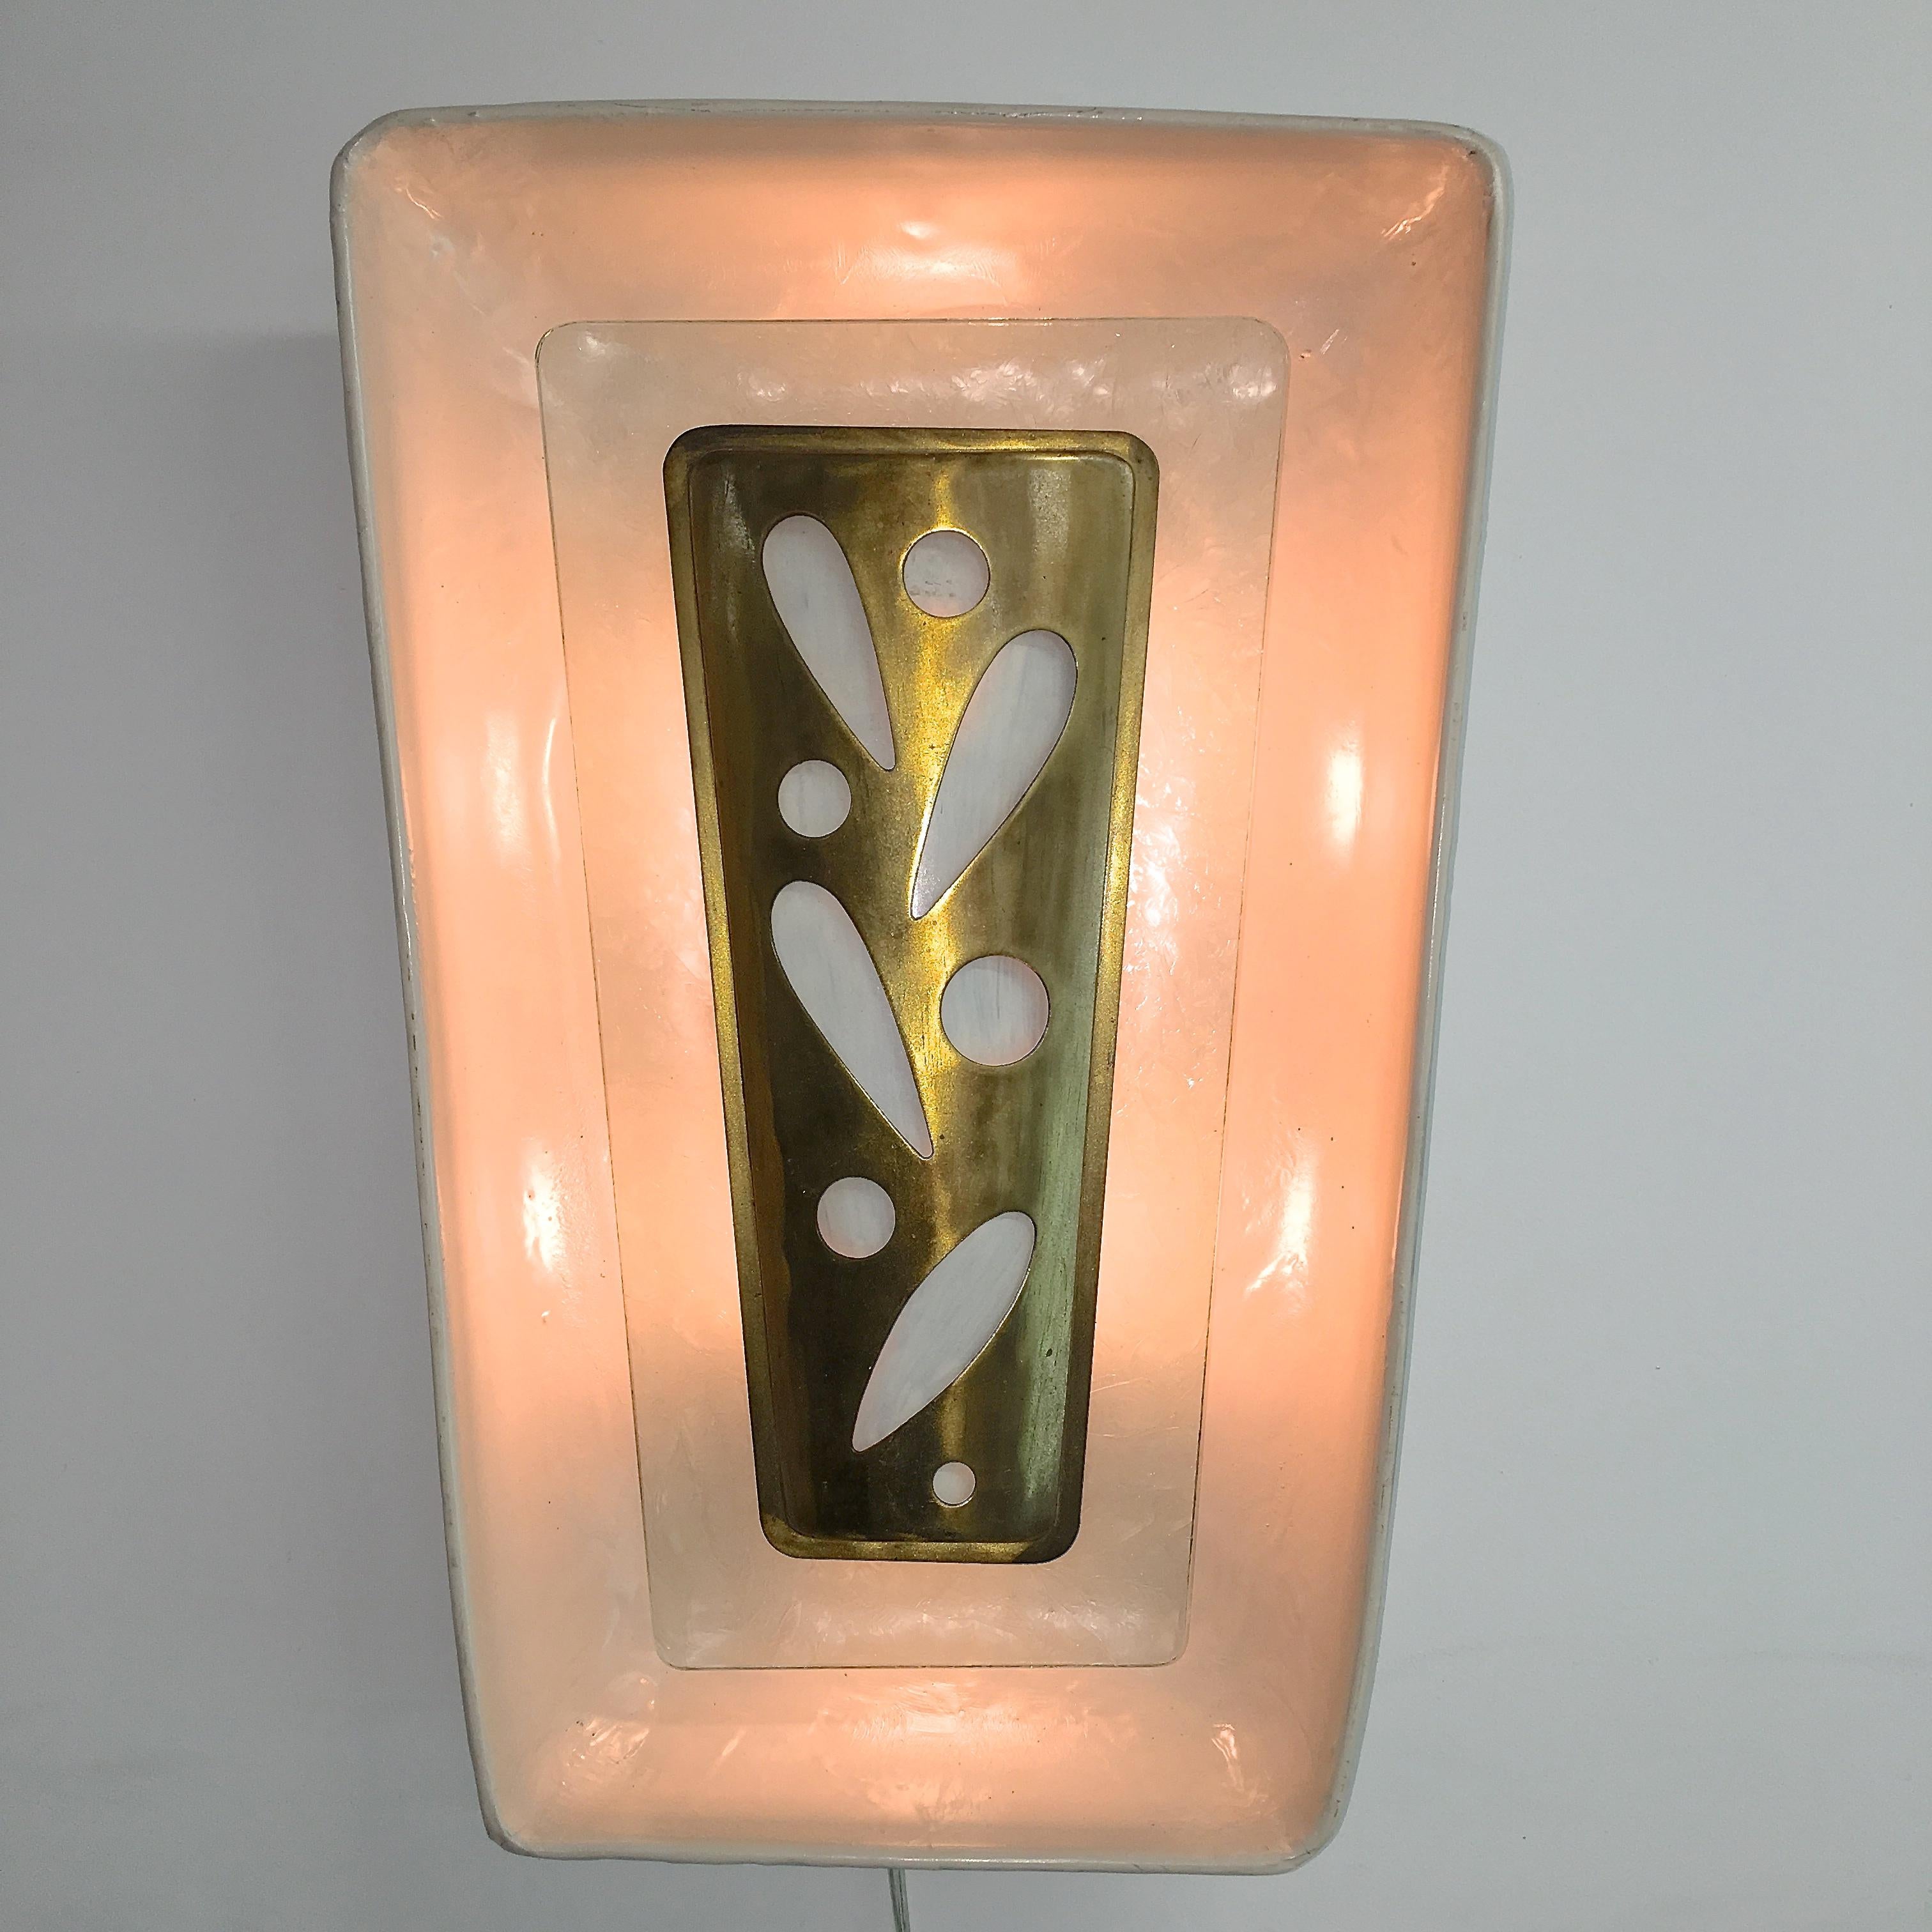 Gio Ponti Wall Sconce from the m/s Augustus Italian Ocean Liner 1951 For Sale 6